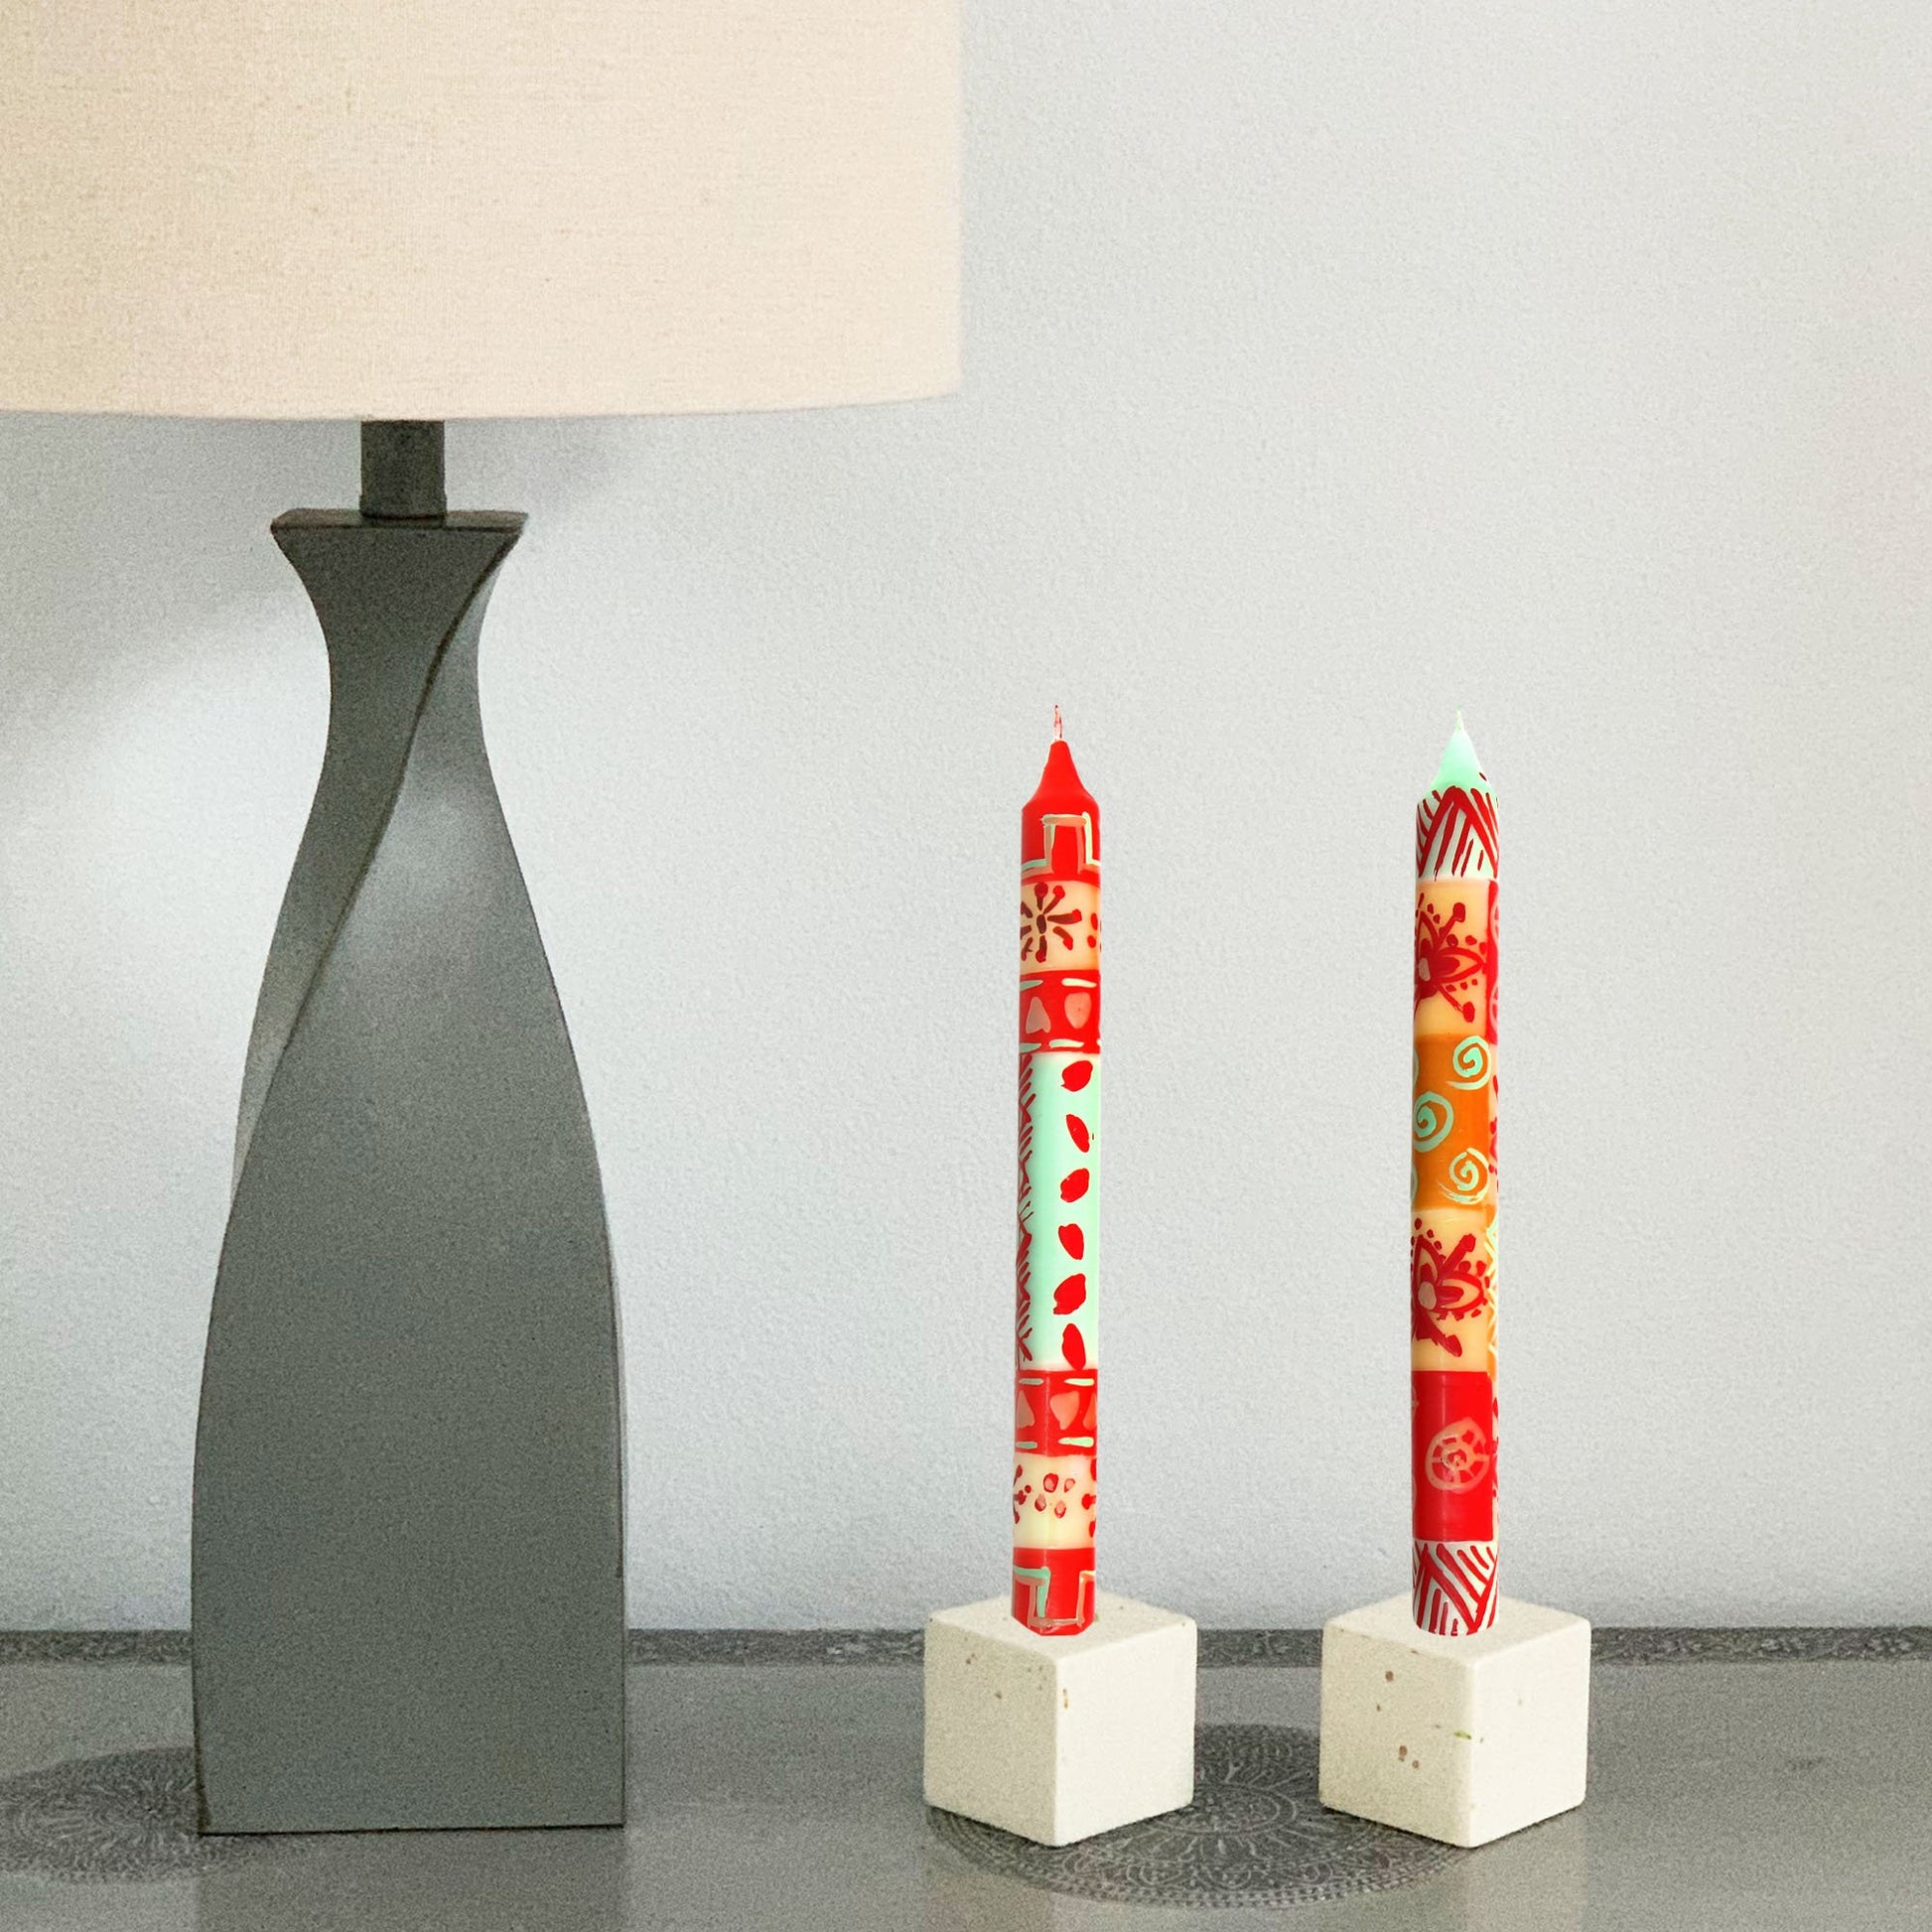 Hand Painted Candles in Owoduni Design (pair of tapers) - Nobunto - Linda Kay Gifford’s - Those Nasty Women TALK! by SWEETSurvivor